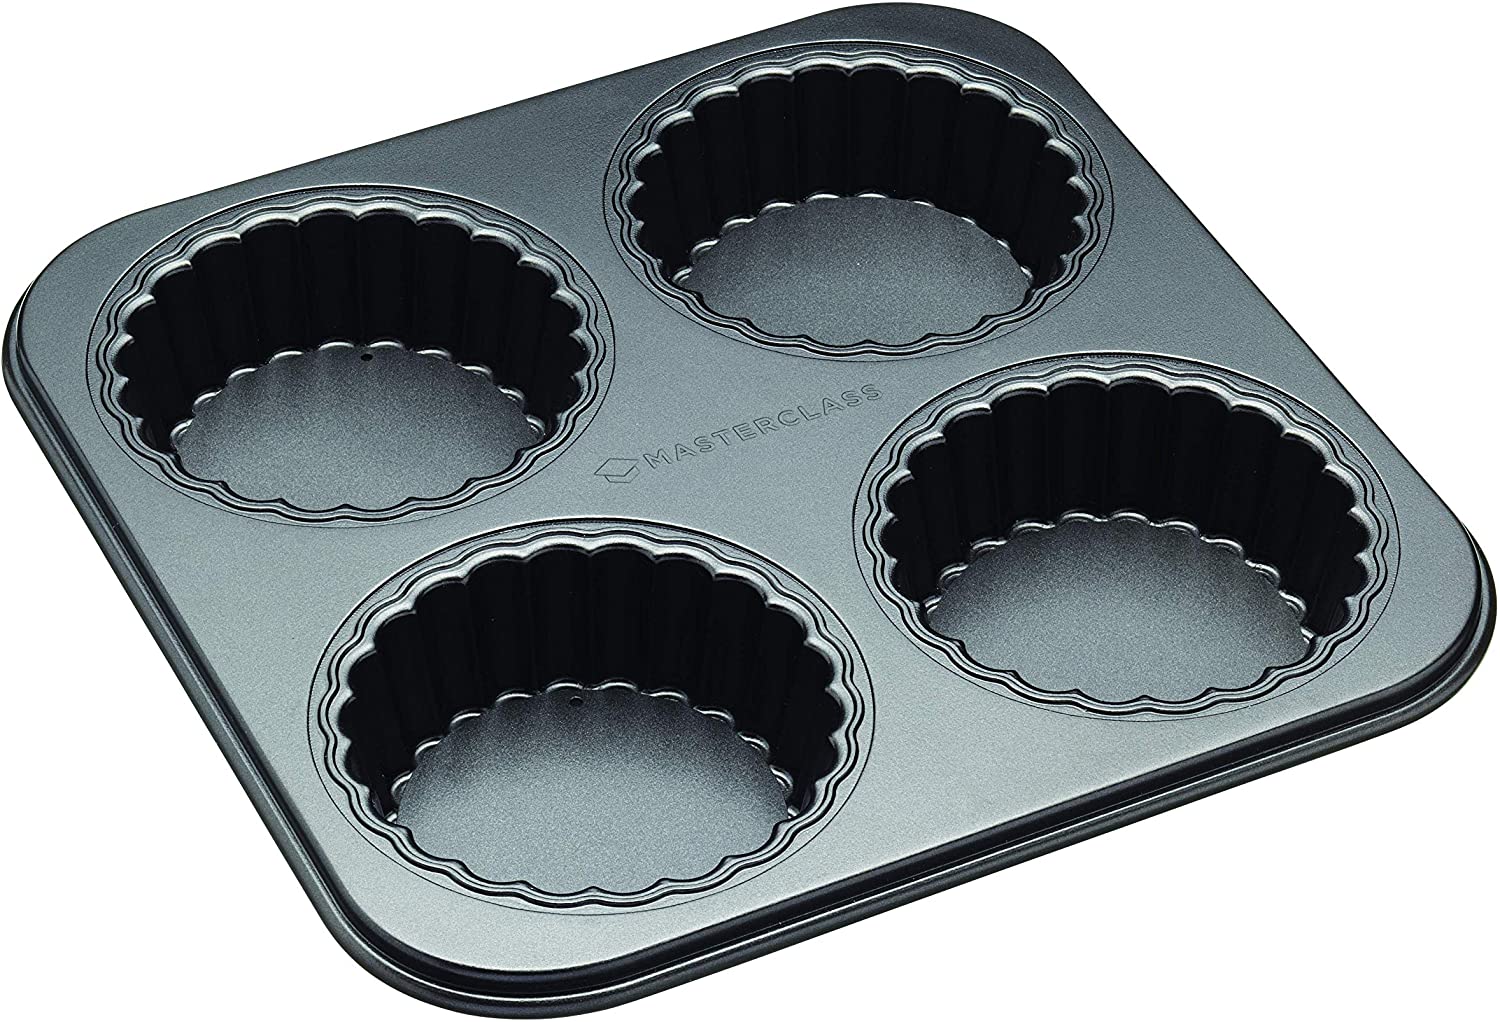 KitchenCraft Master Class Non-Stick 4-Hole Fluted Mini Tart Tray with Loose Base, 26 cm (10 inch)